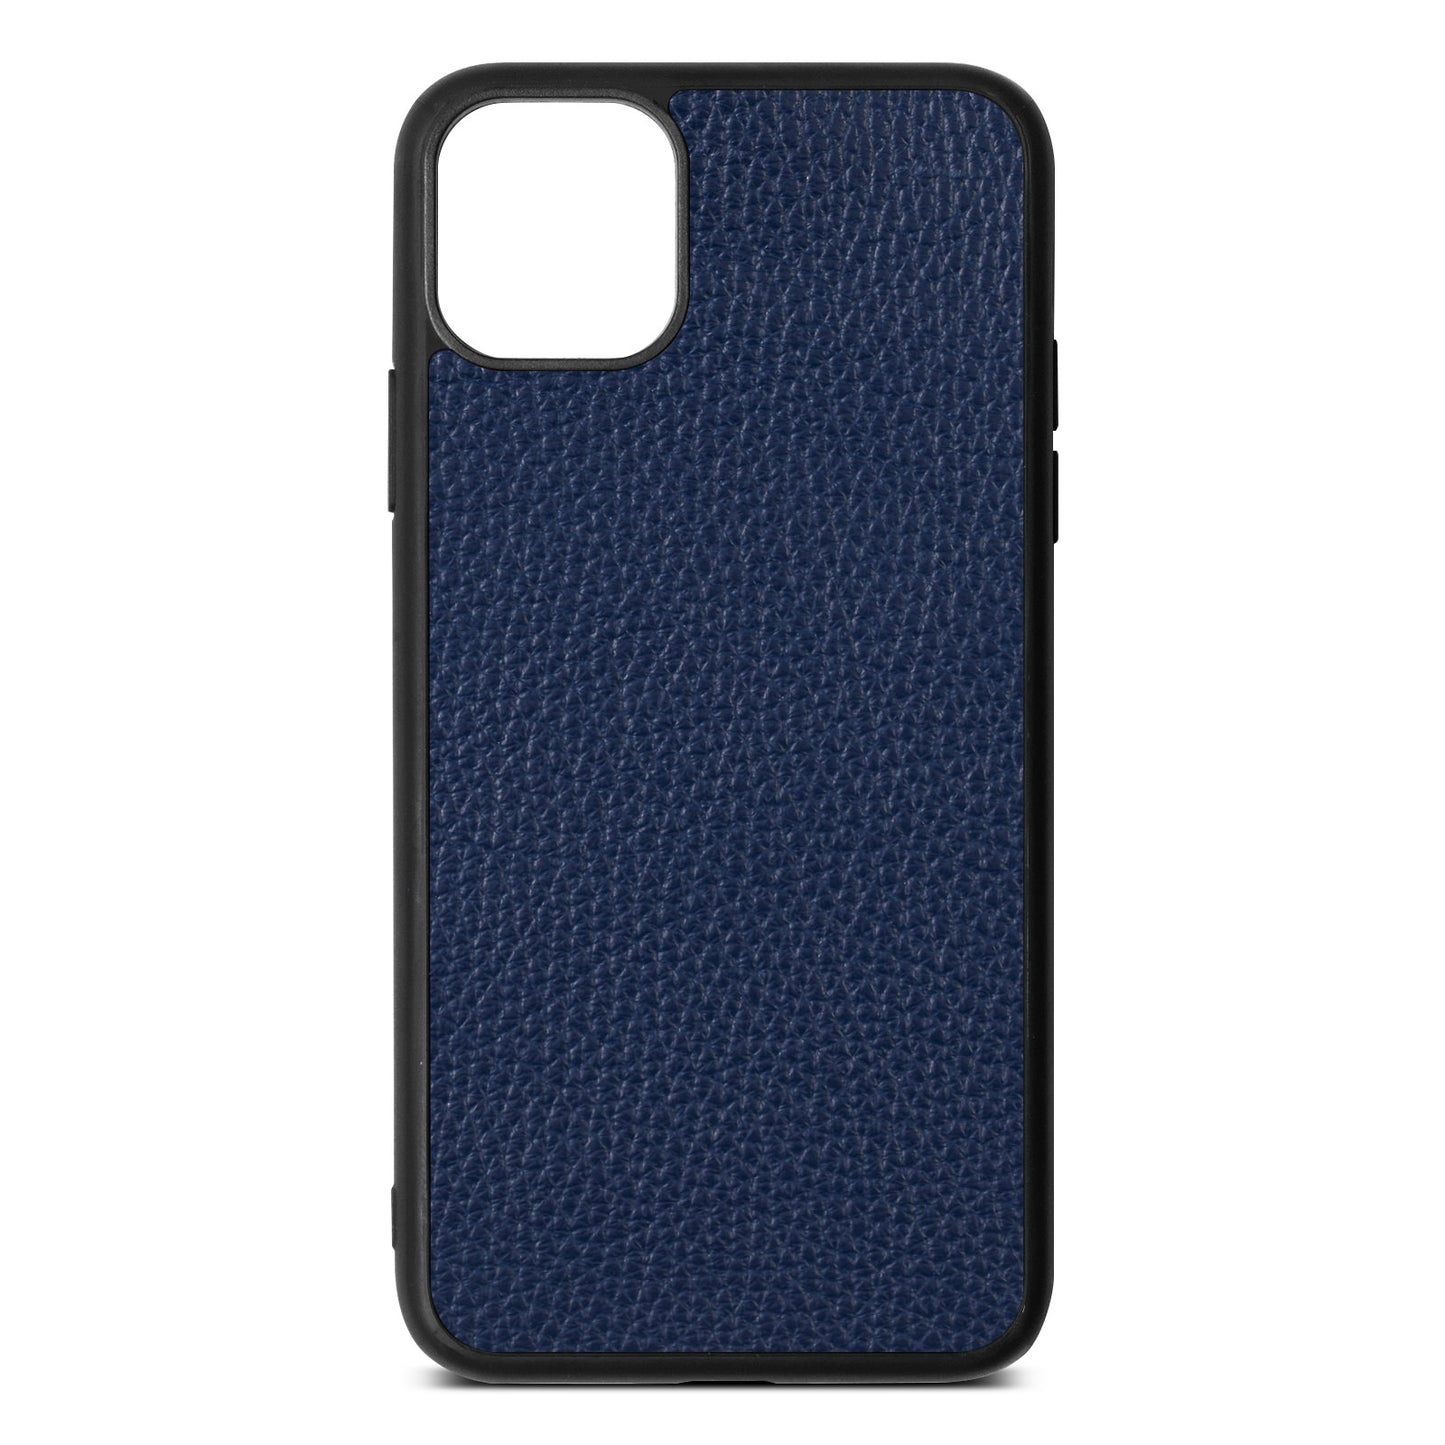 Blank iPhone 11 Pro Max Navy Blue Pebble Grain Leather Case